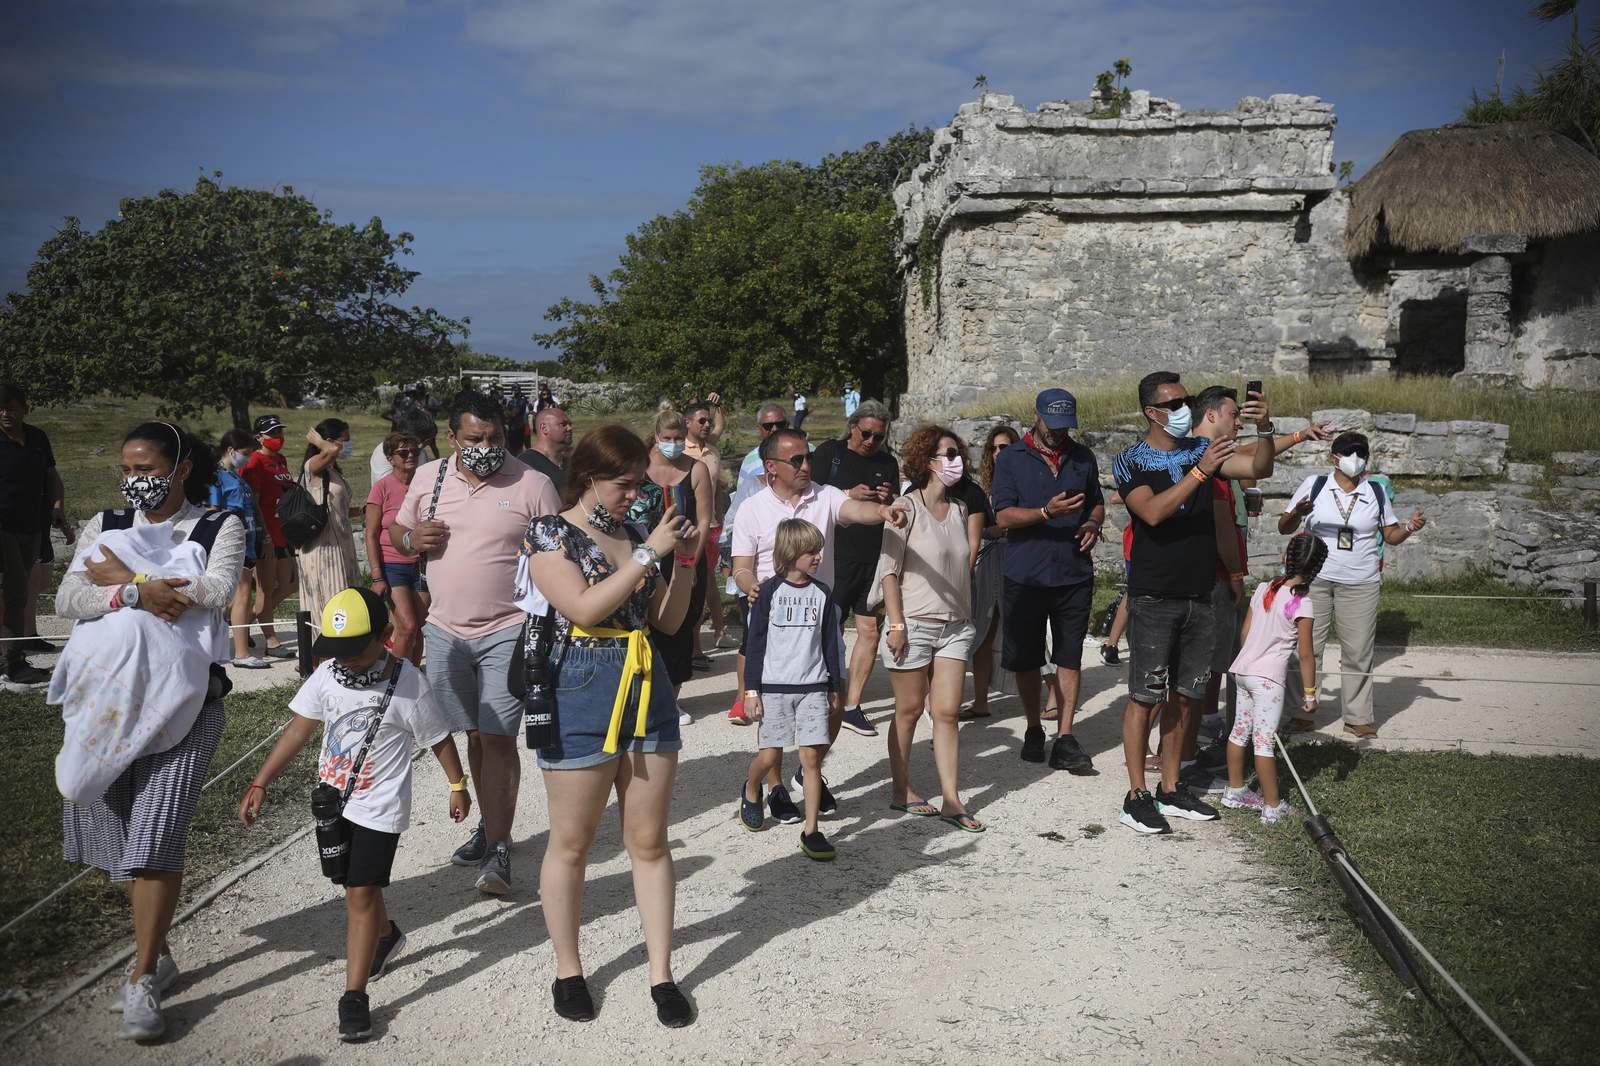 Mexico complains of mask-less tourists, closes ruin site